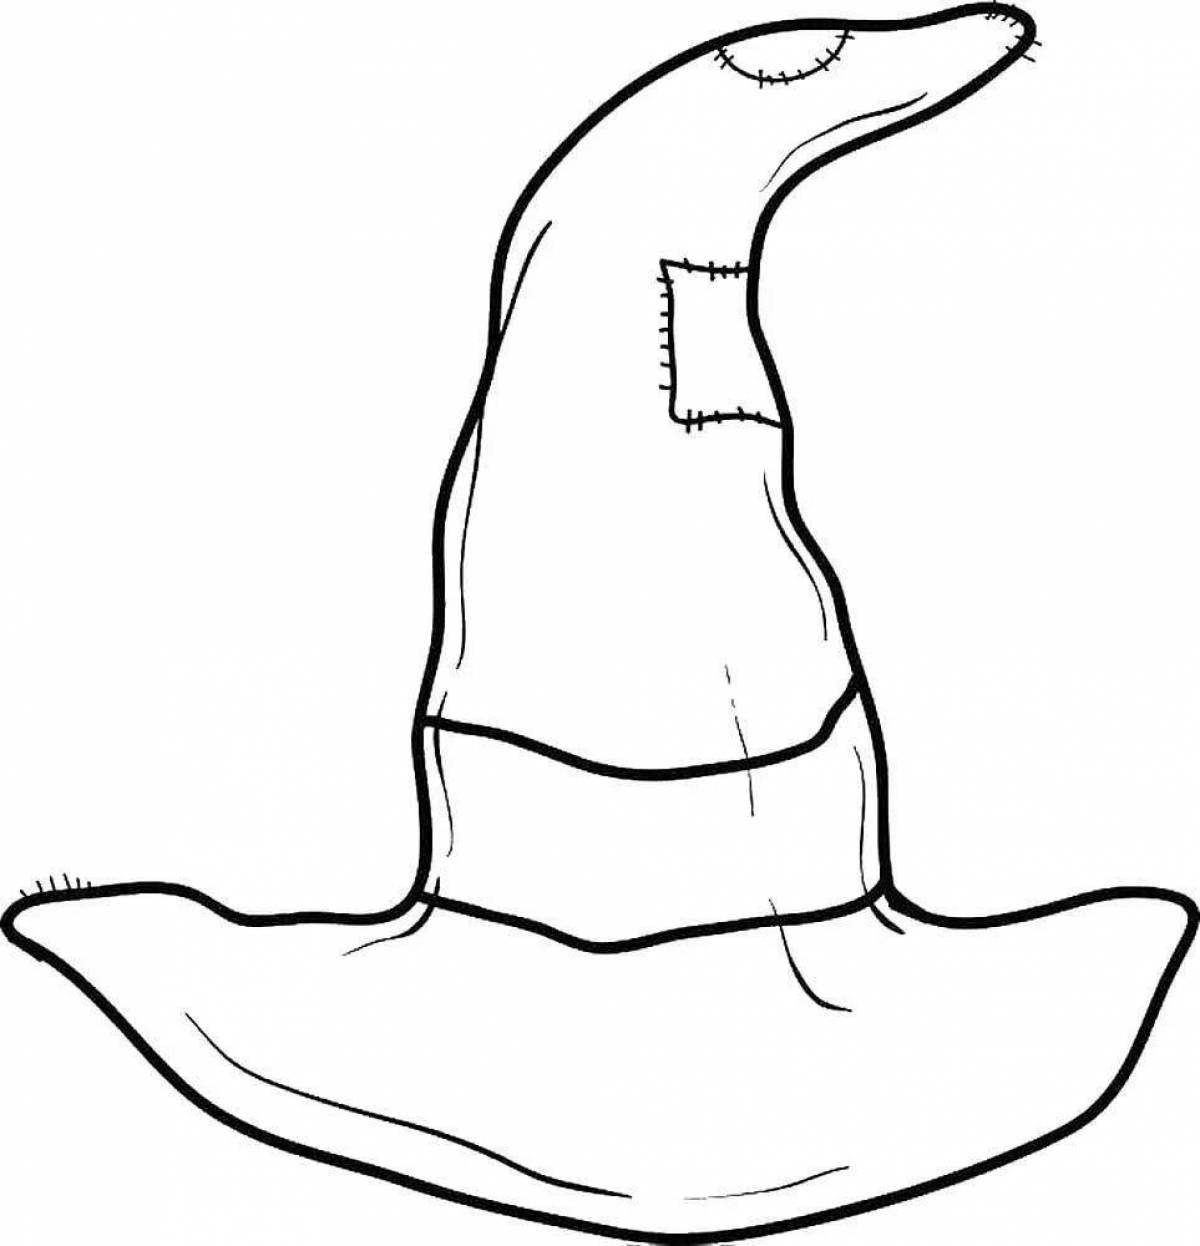 Coloring page mystical wizard hat